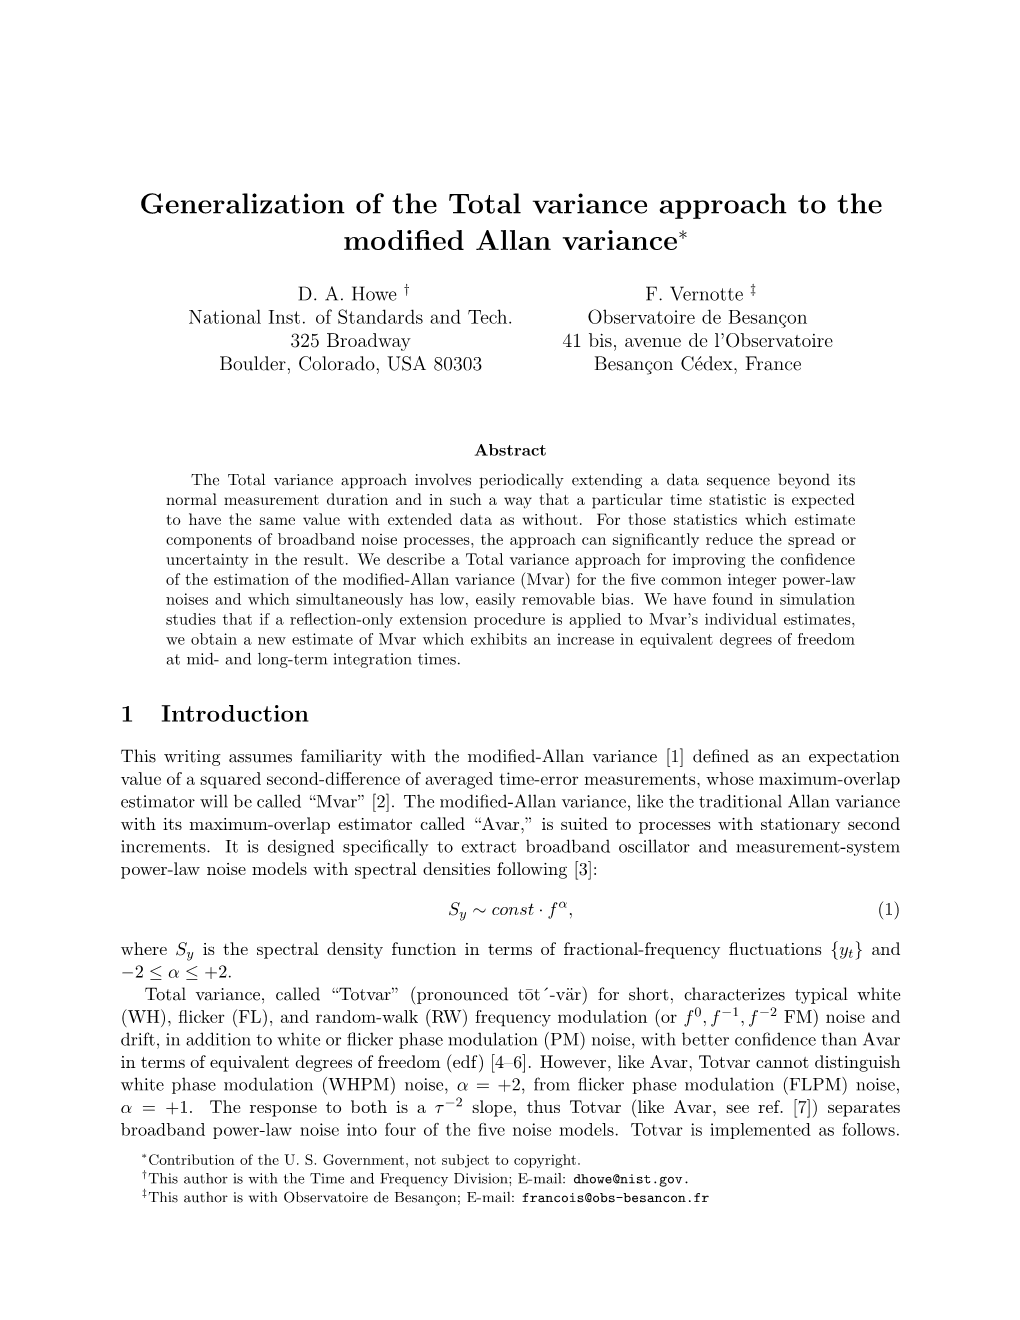 Generalization of the Total Variance Approach to the Modified Allan